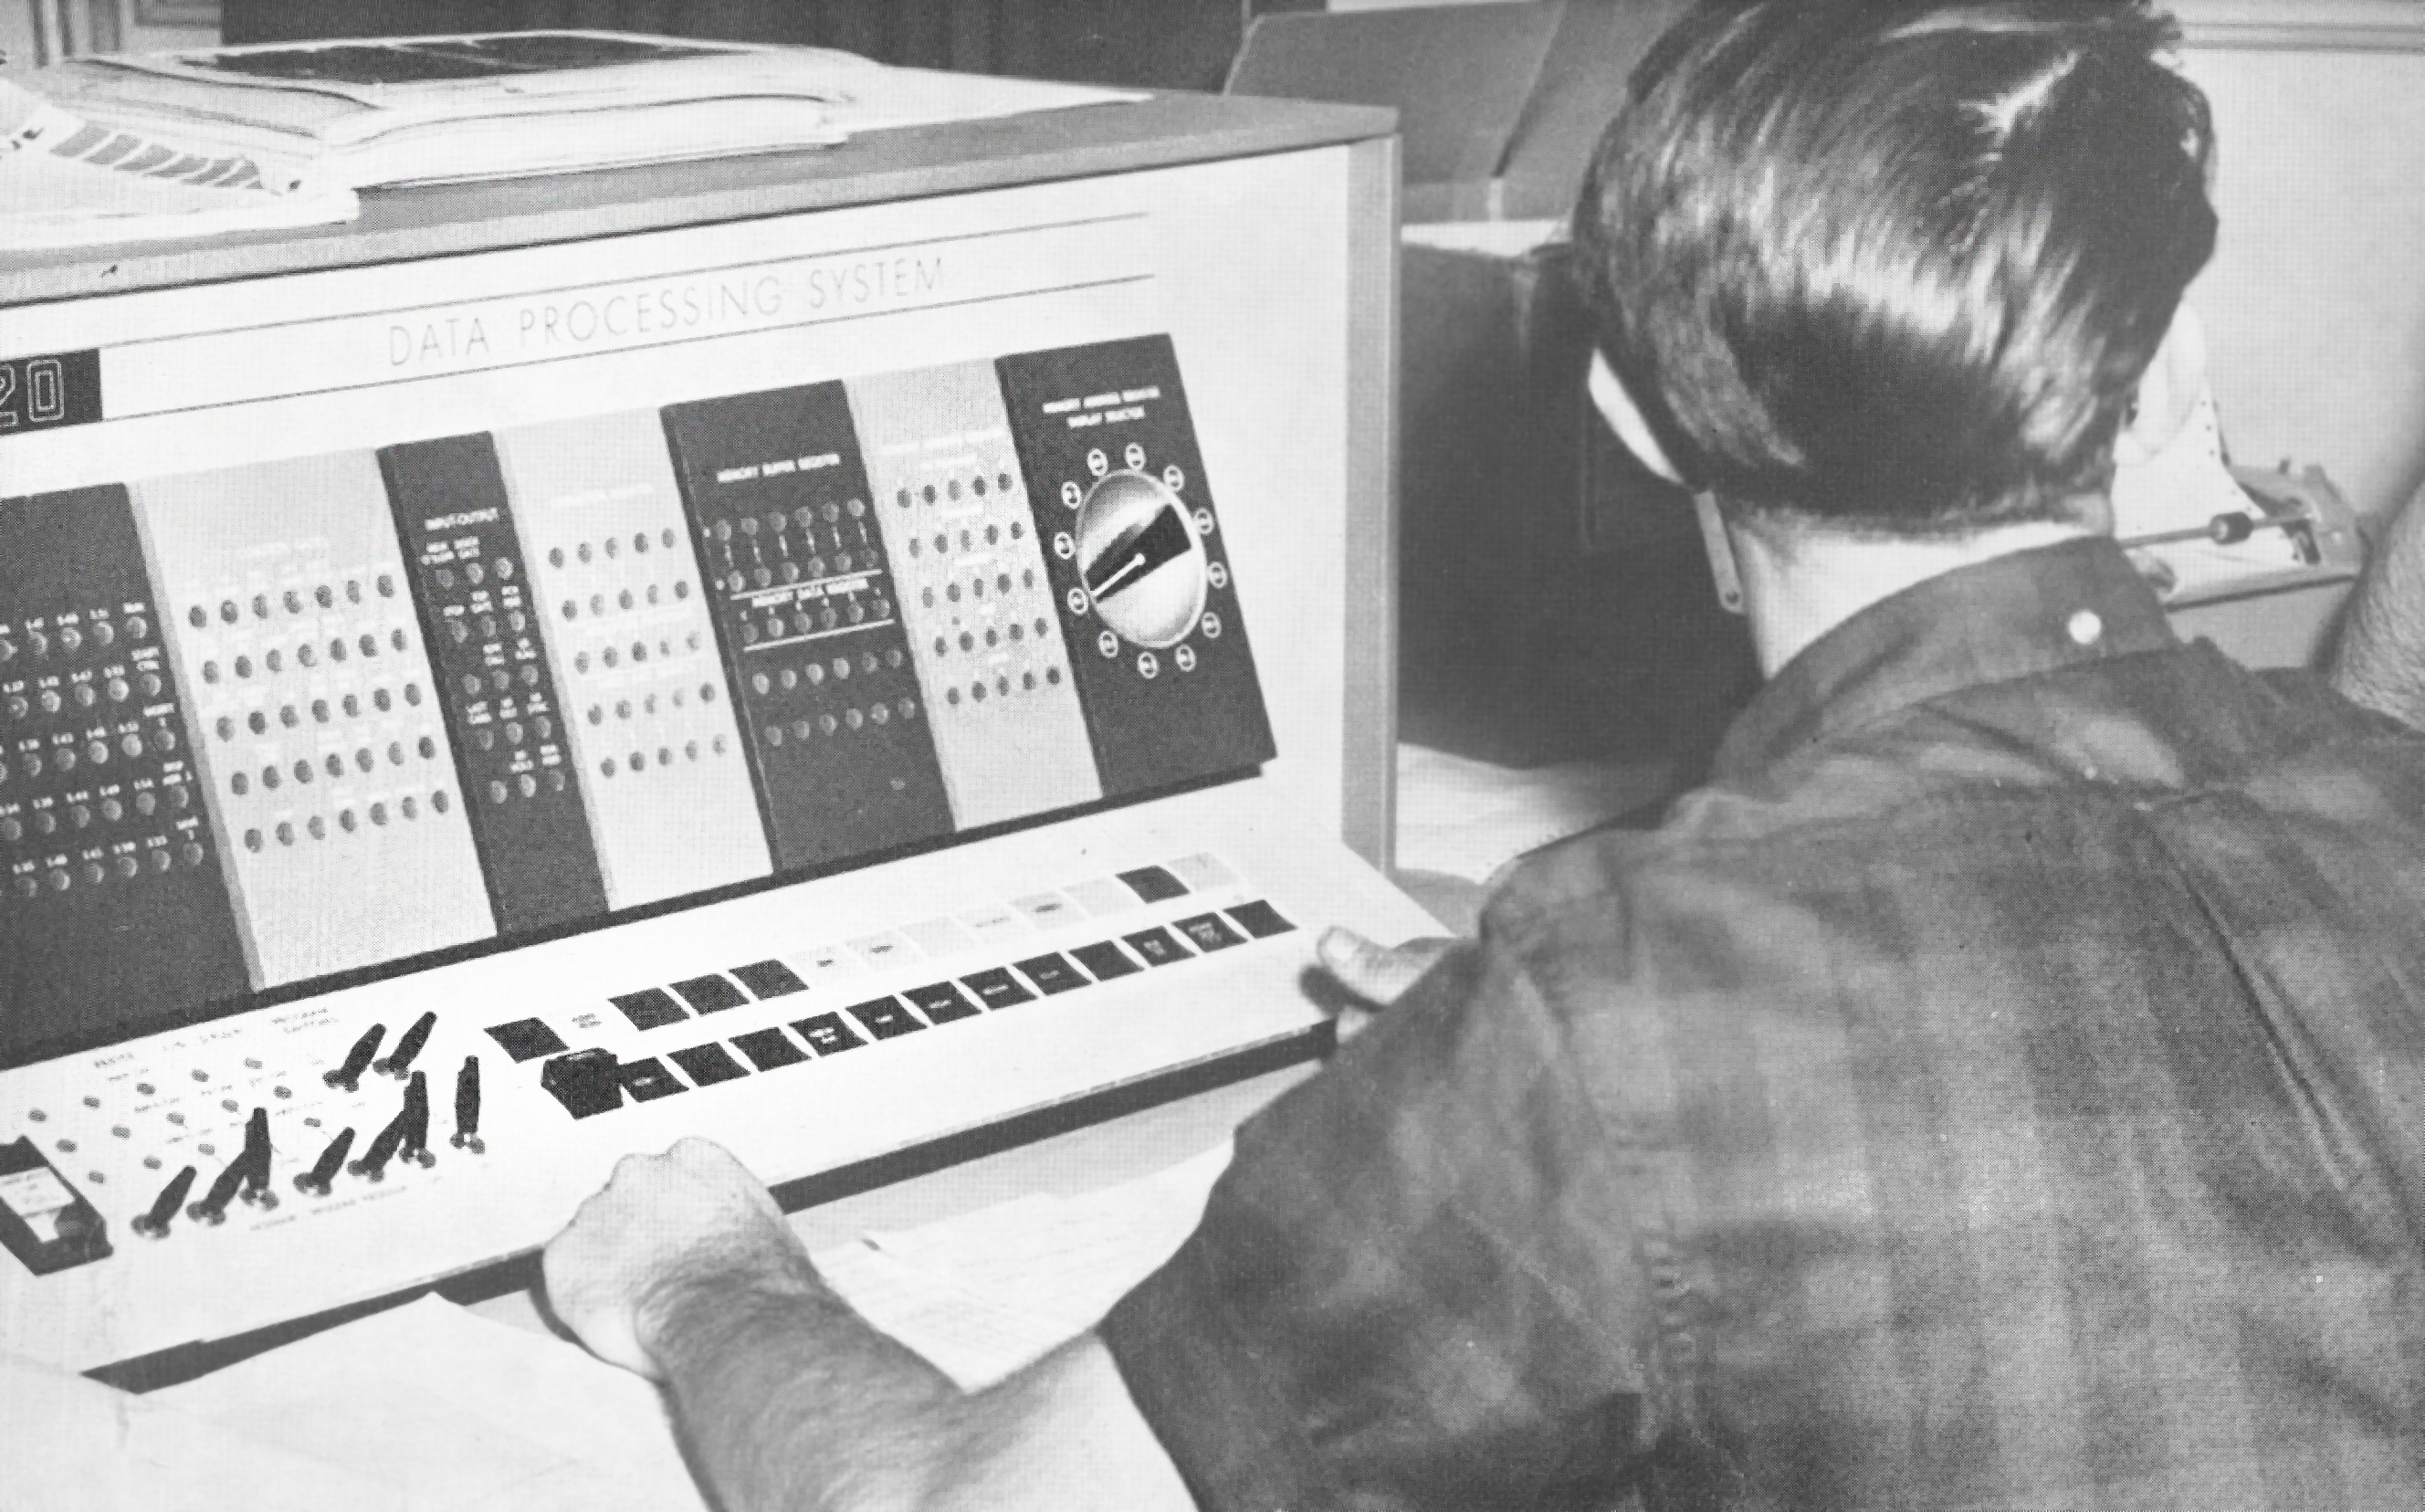 Computer science courses have changed just a bit in six decades.